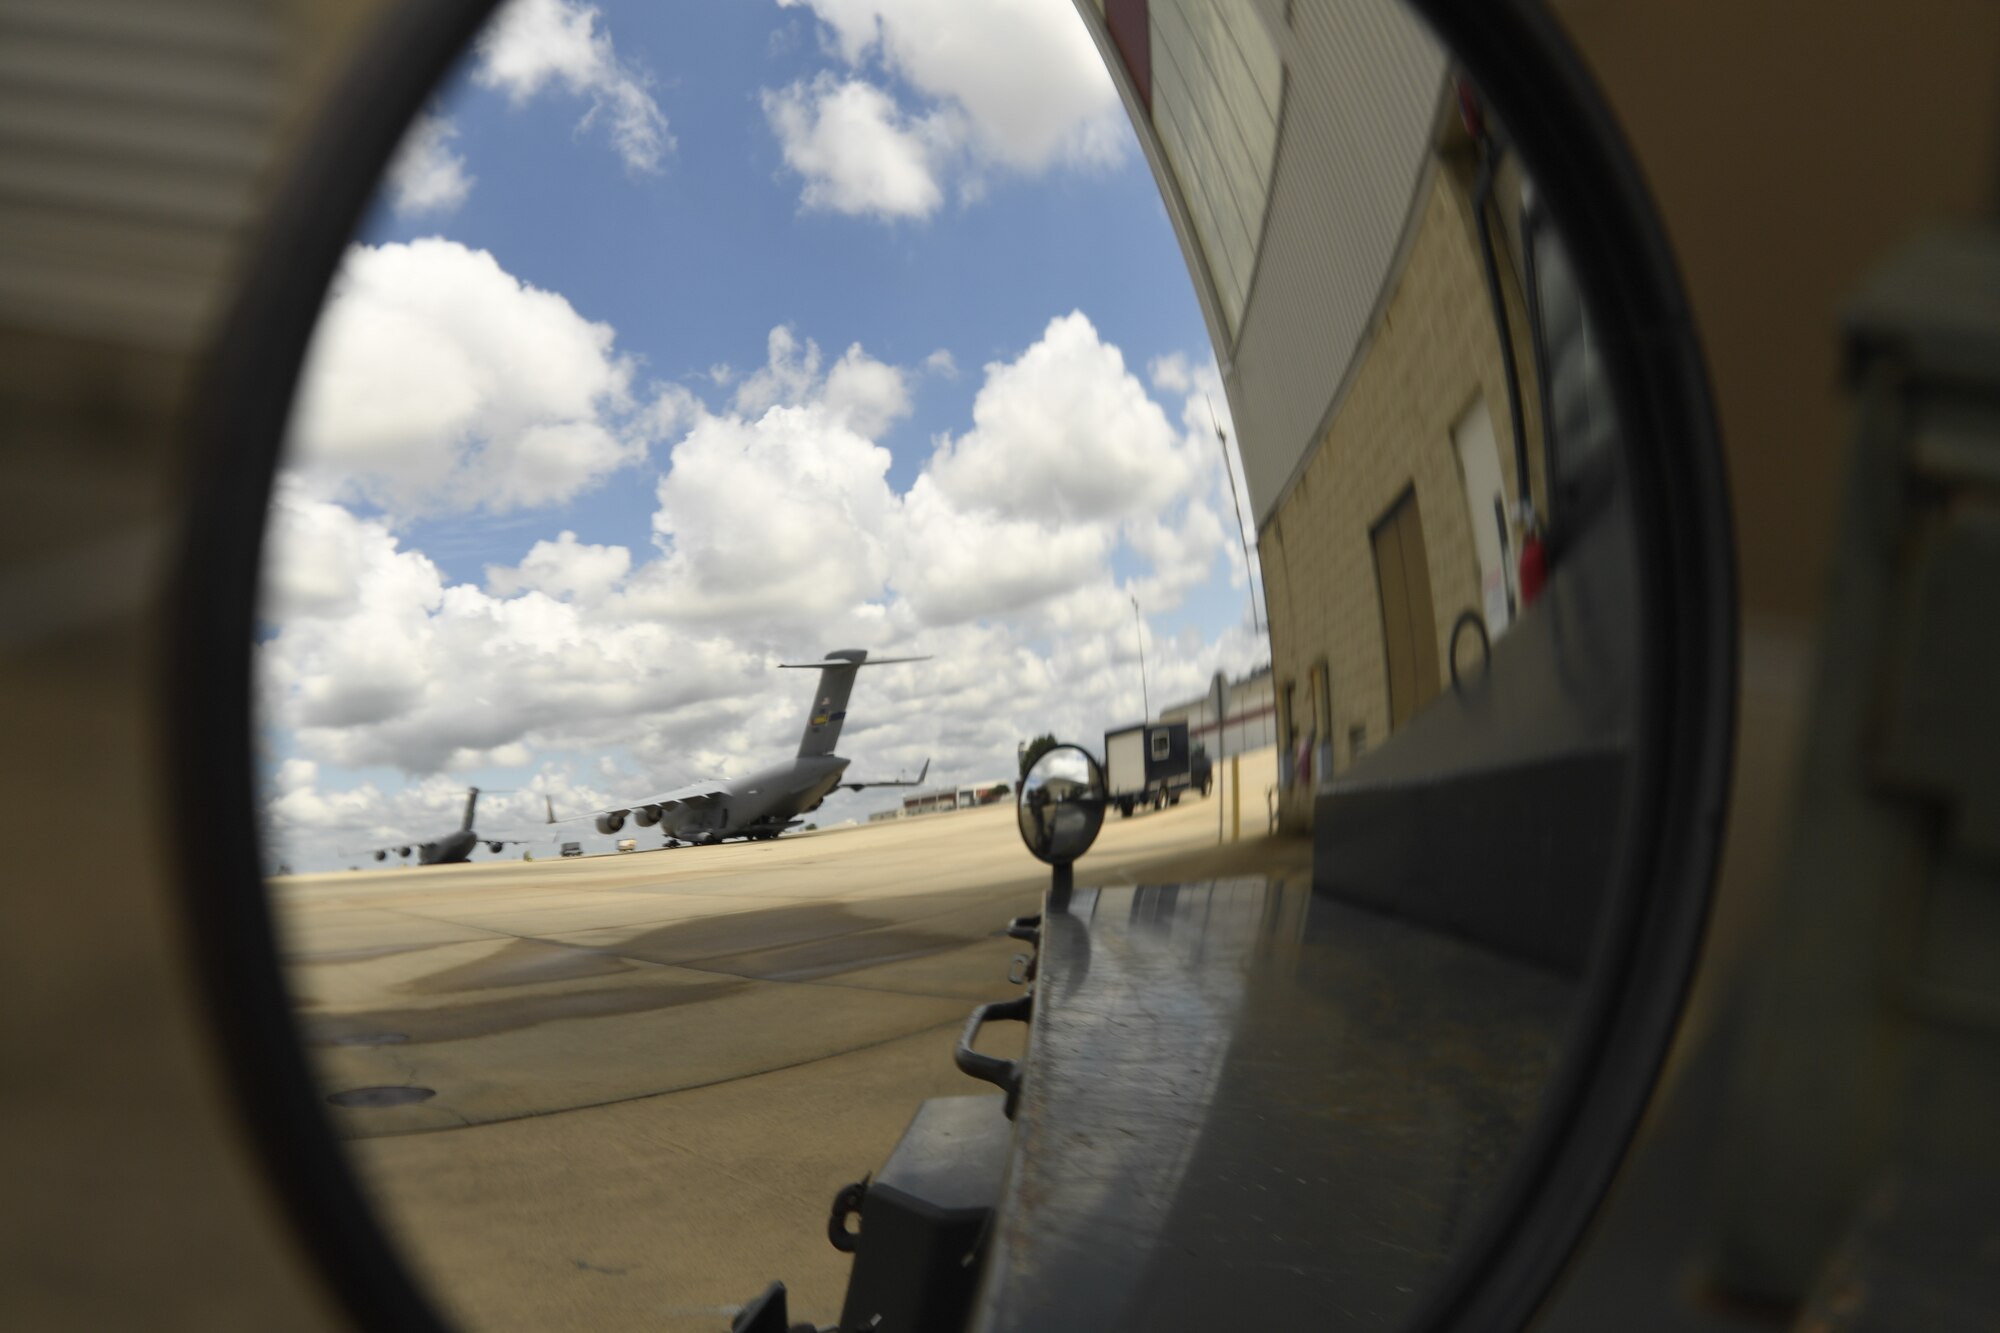 Members of the 145th Aircraft Maintenance Squadron (AMXS) prepare to tow a C-17 Globemaster III aircraft at the North Carolina Air National Guard Base, Charlotte Douglas International Airport, July 24, 2018. Since the aircraft conversion in April, the 145th AMXS is working to train maintenance personnel with a goal of them being fully qualified.